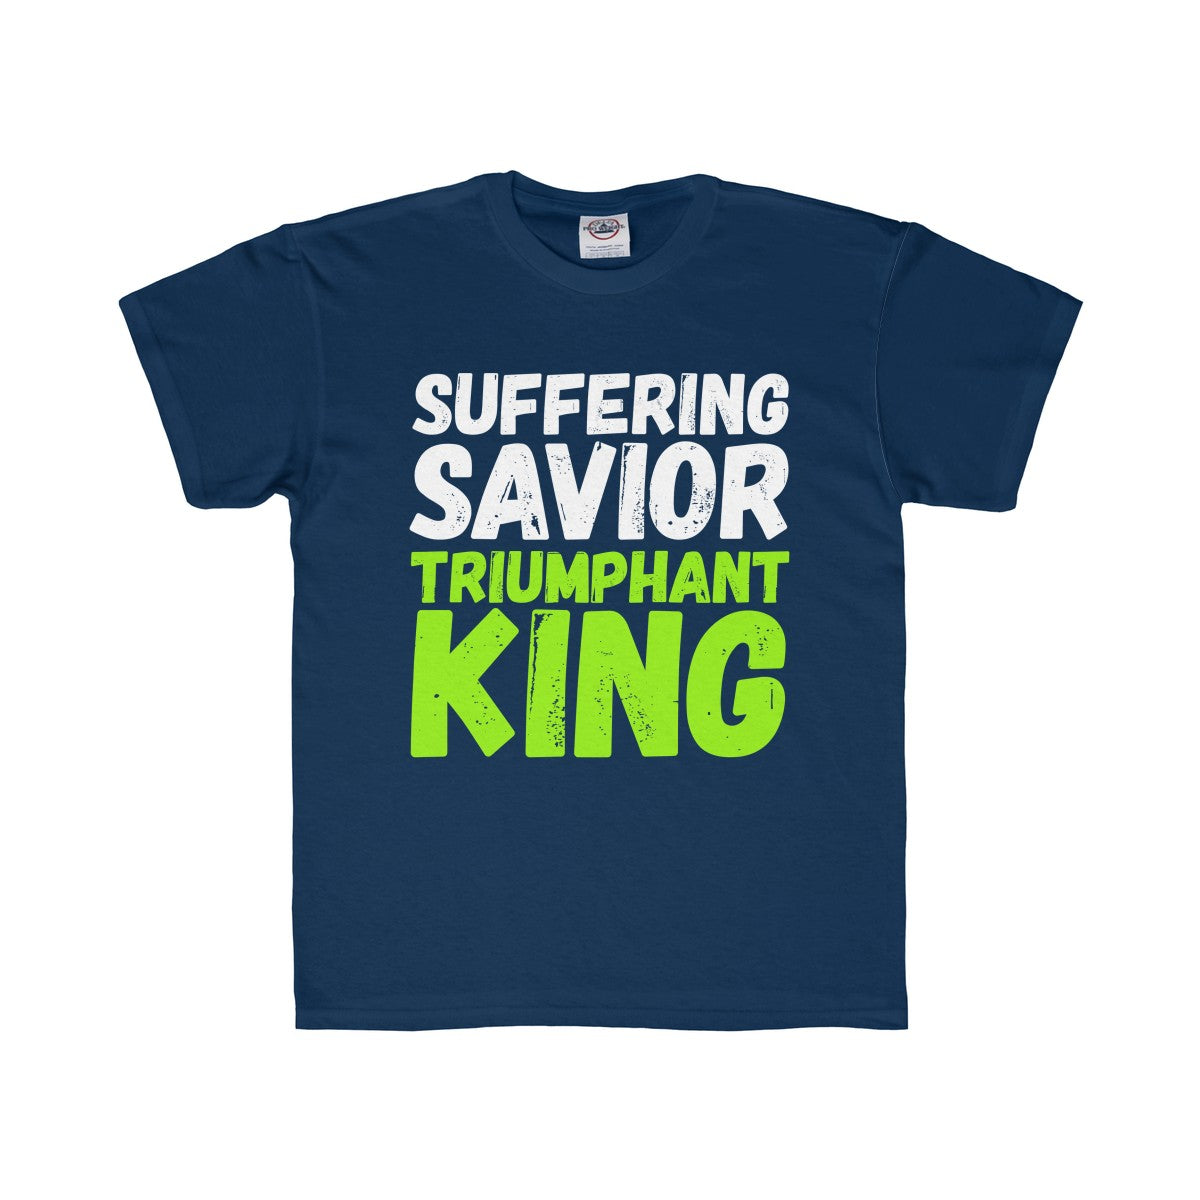 Suffering Savior Triumphant King Youth Regular Fit Tee-Kids clothes-PureDesignTees